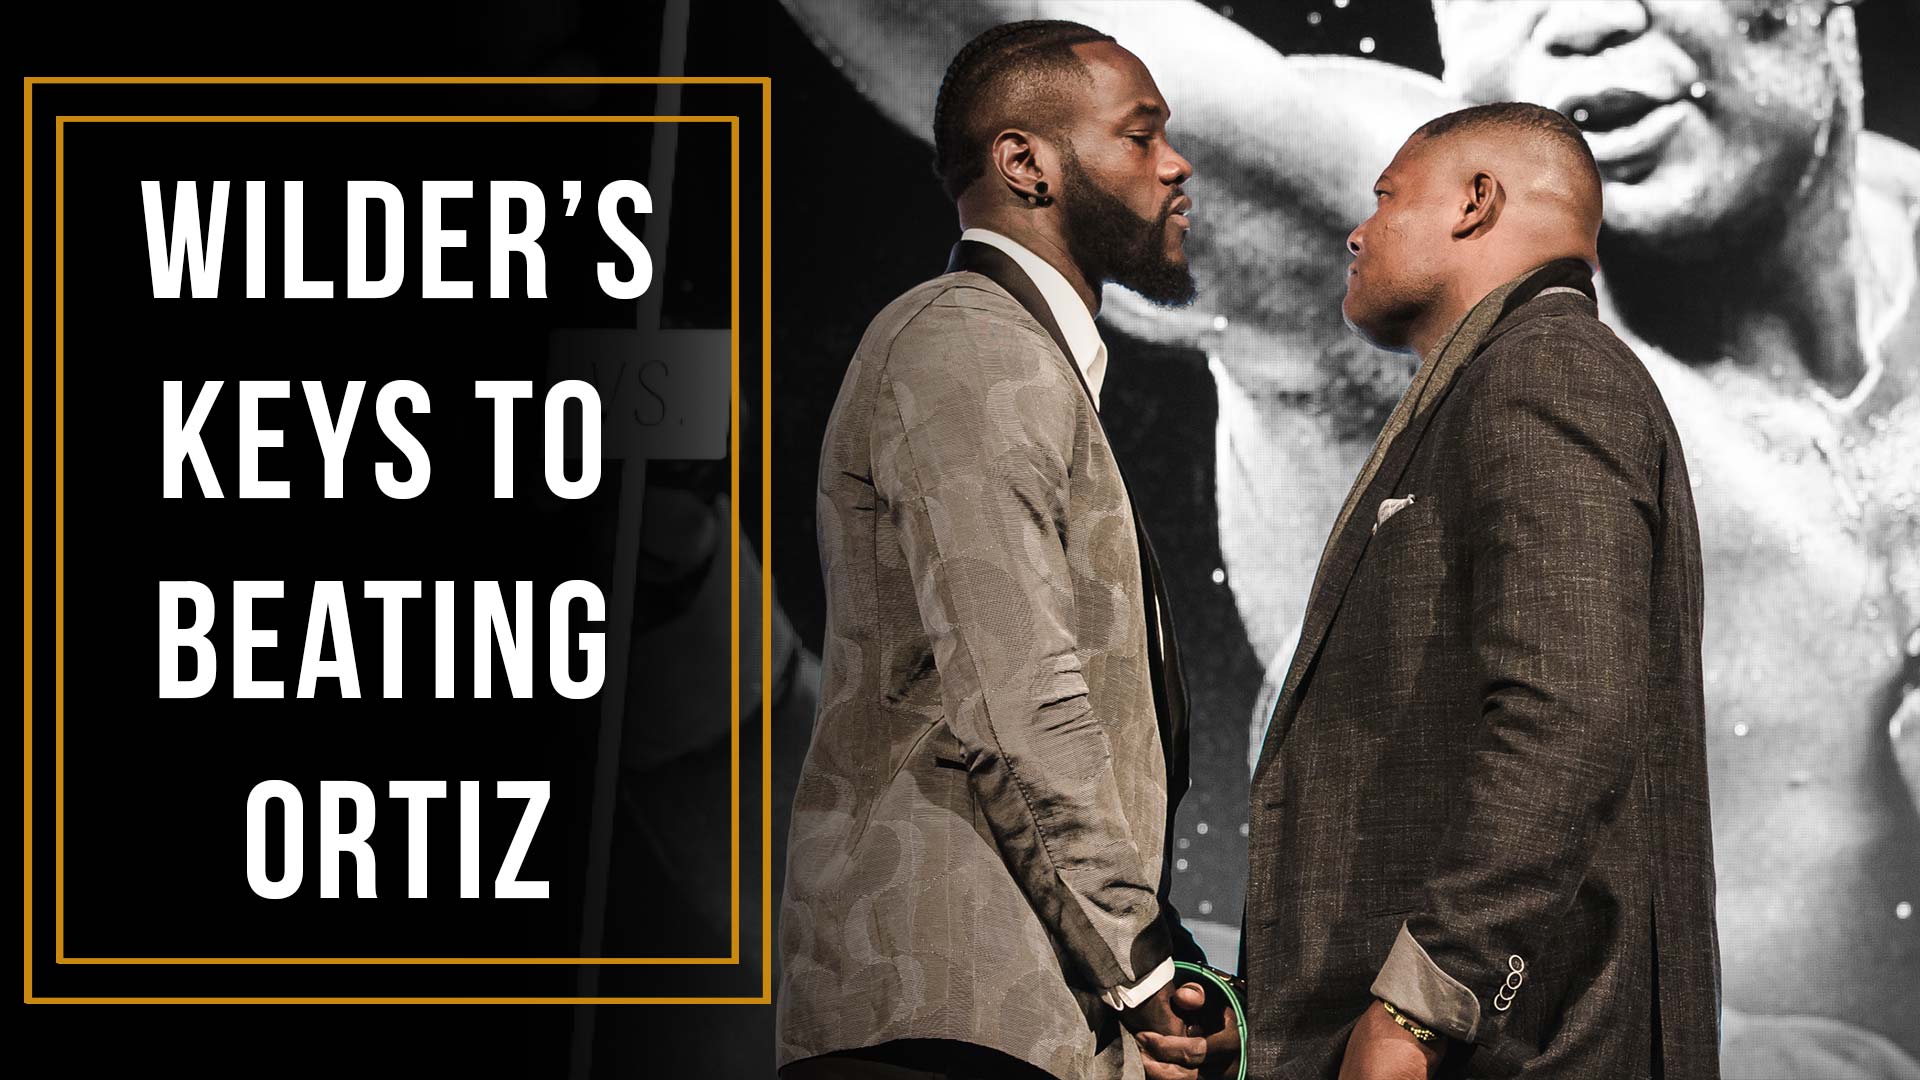 Heavyweight Champ Deontay Wilder shares his keys to beating Luis Ortiz1920 x 1080